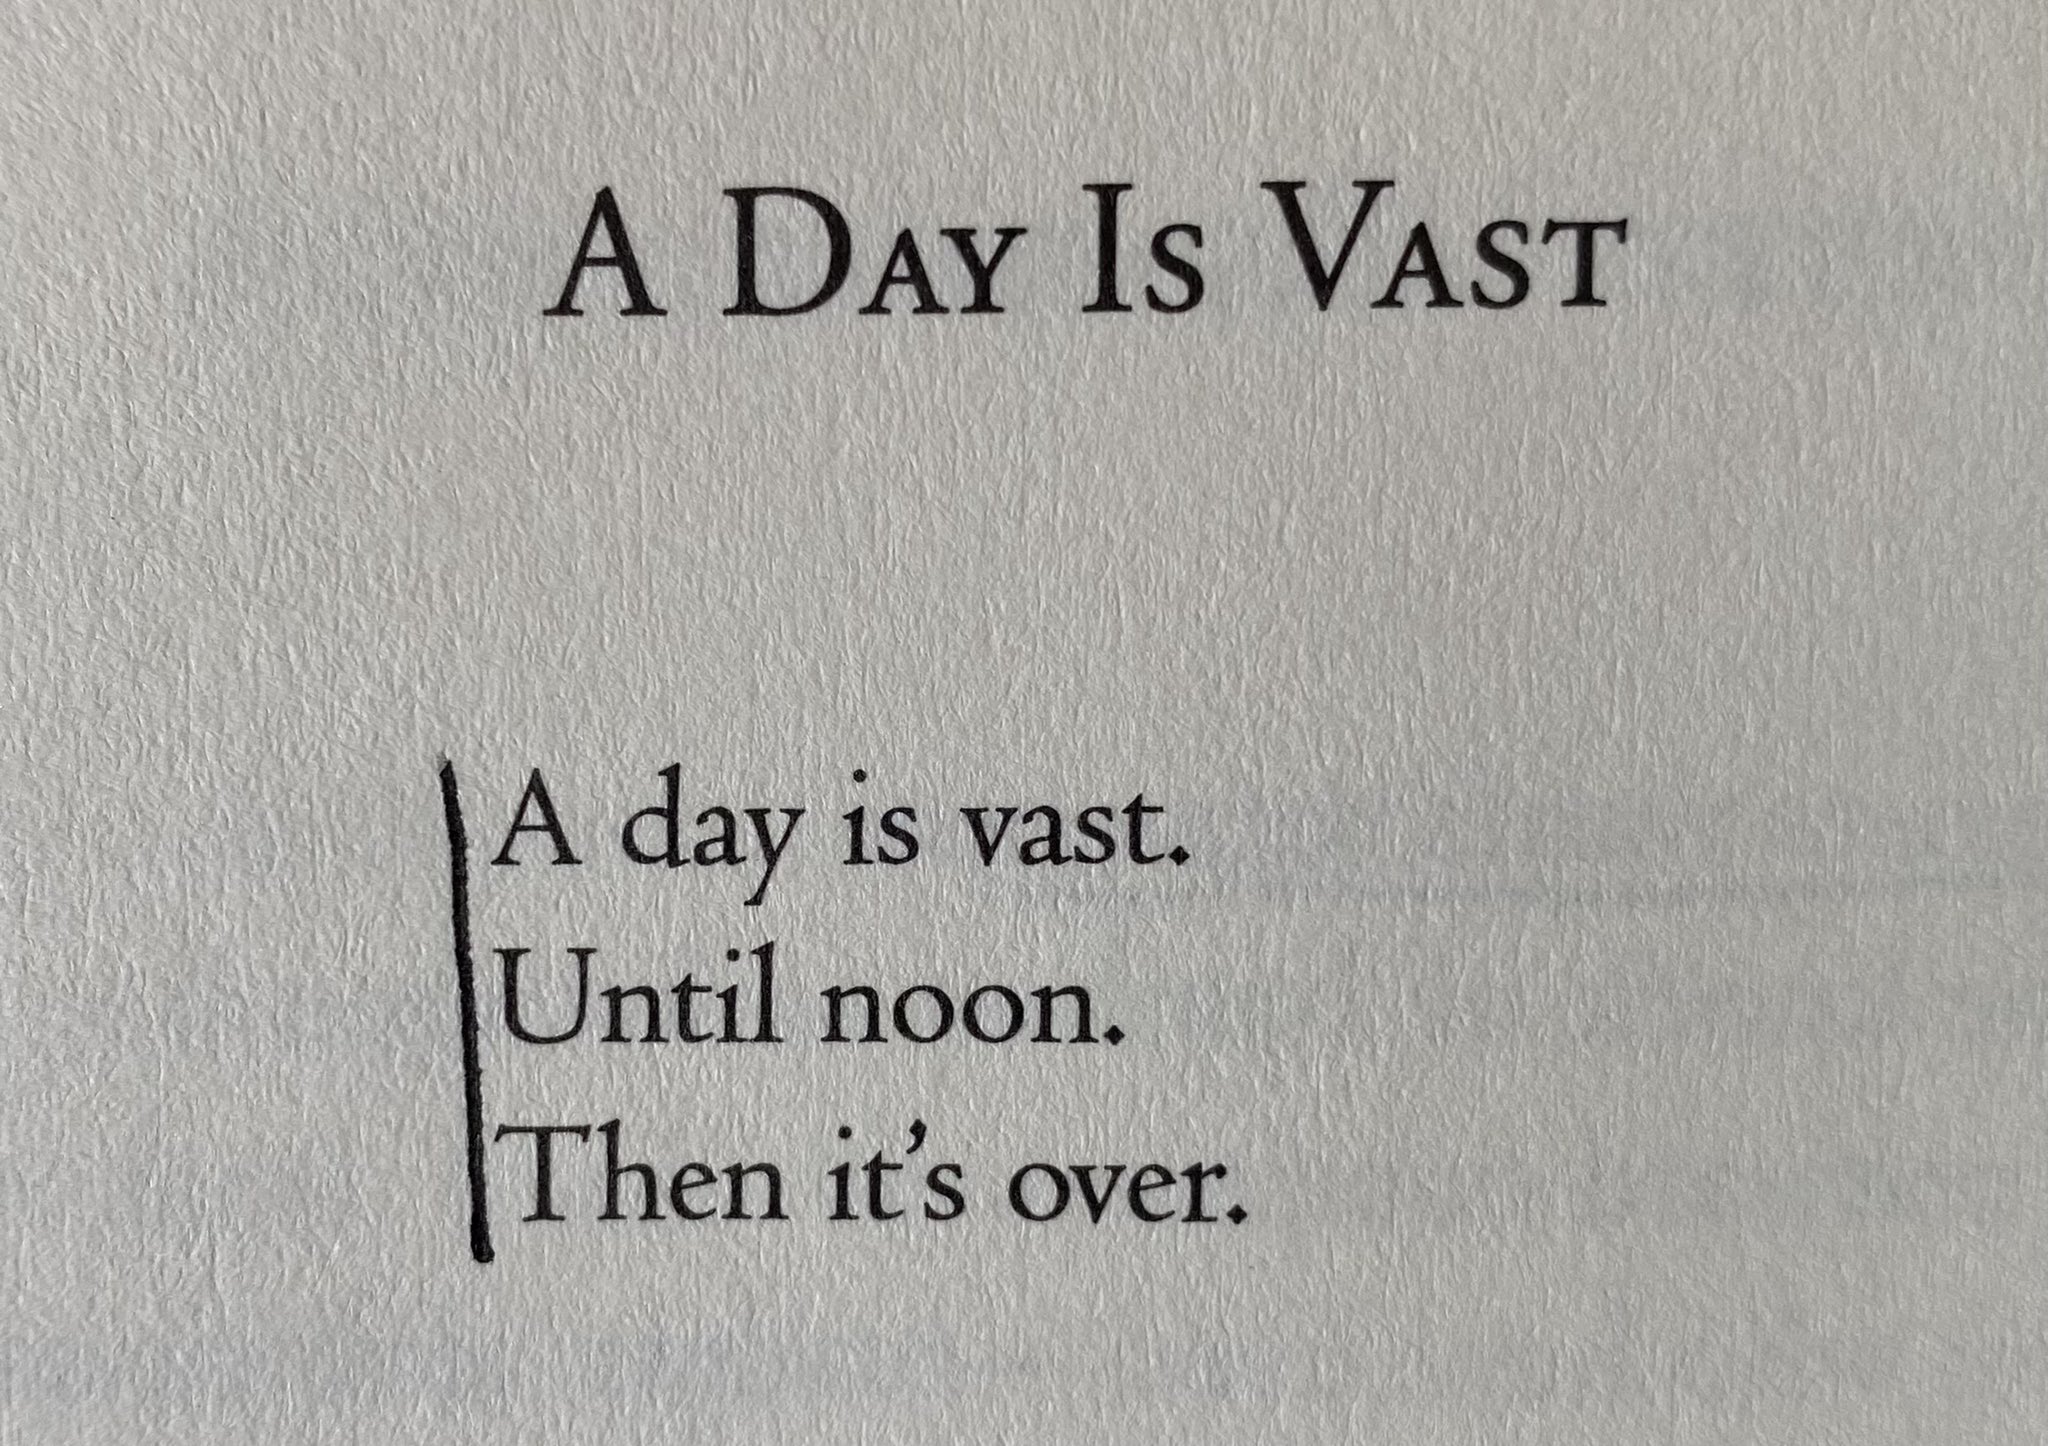 a poem titled A day is vast: A day is vast. / Until noon. / Then it's over.